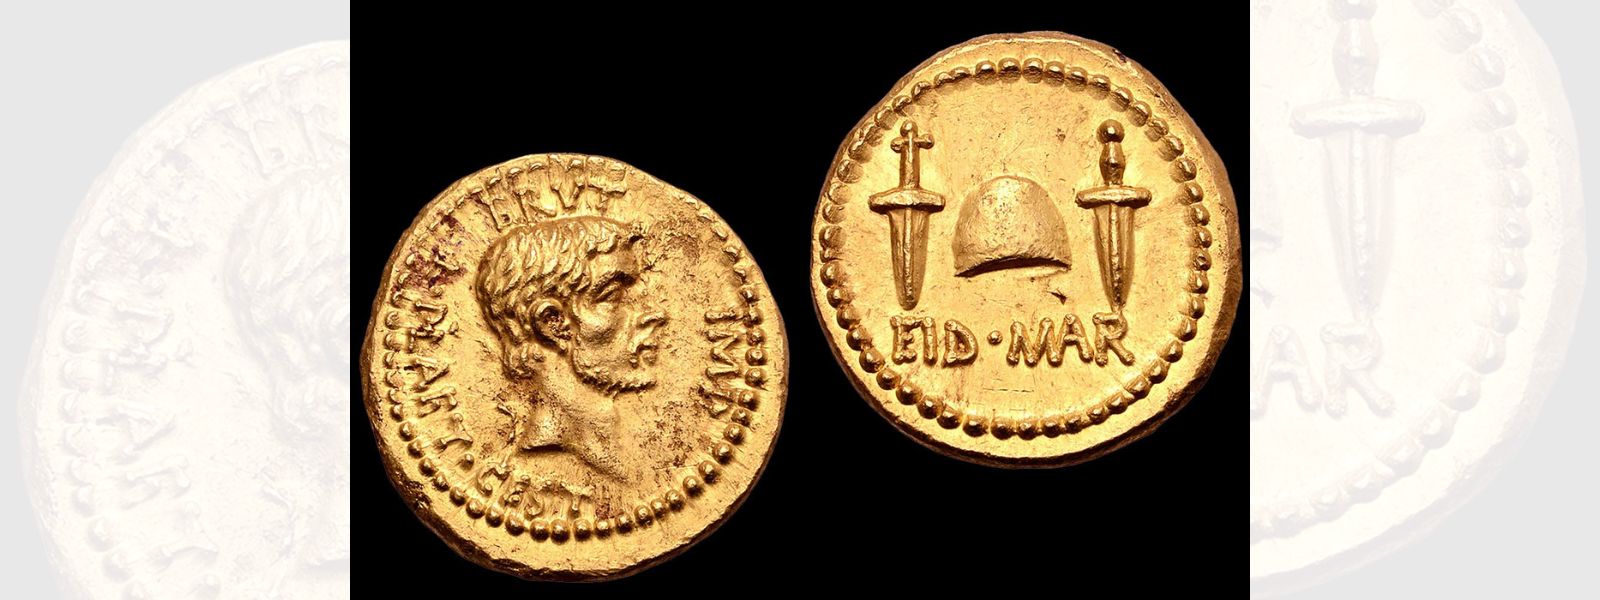 $3.5 million, 2,000-year-old world’s most expensive gold coin seized